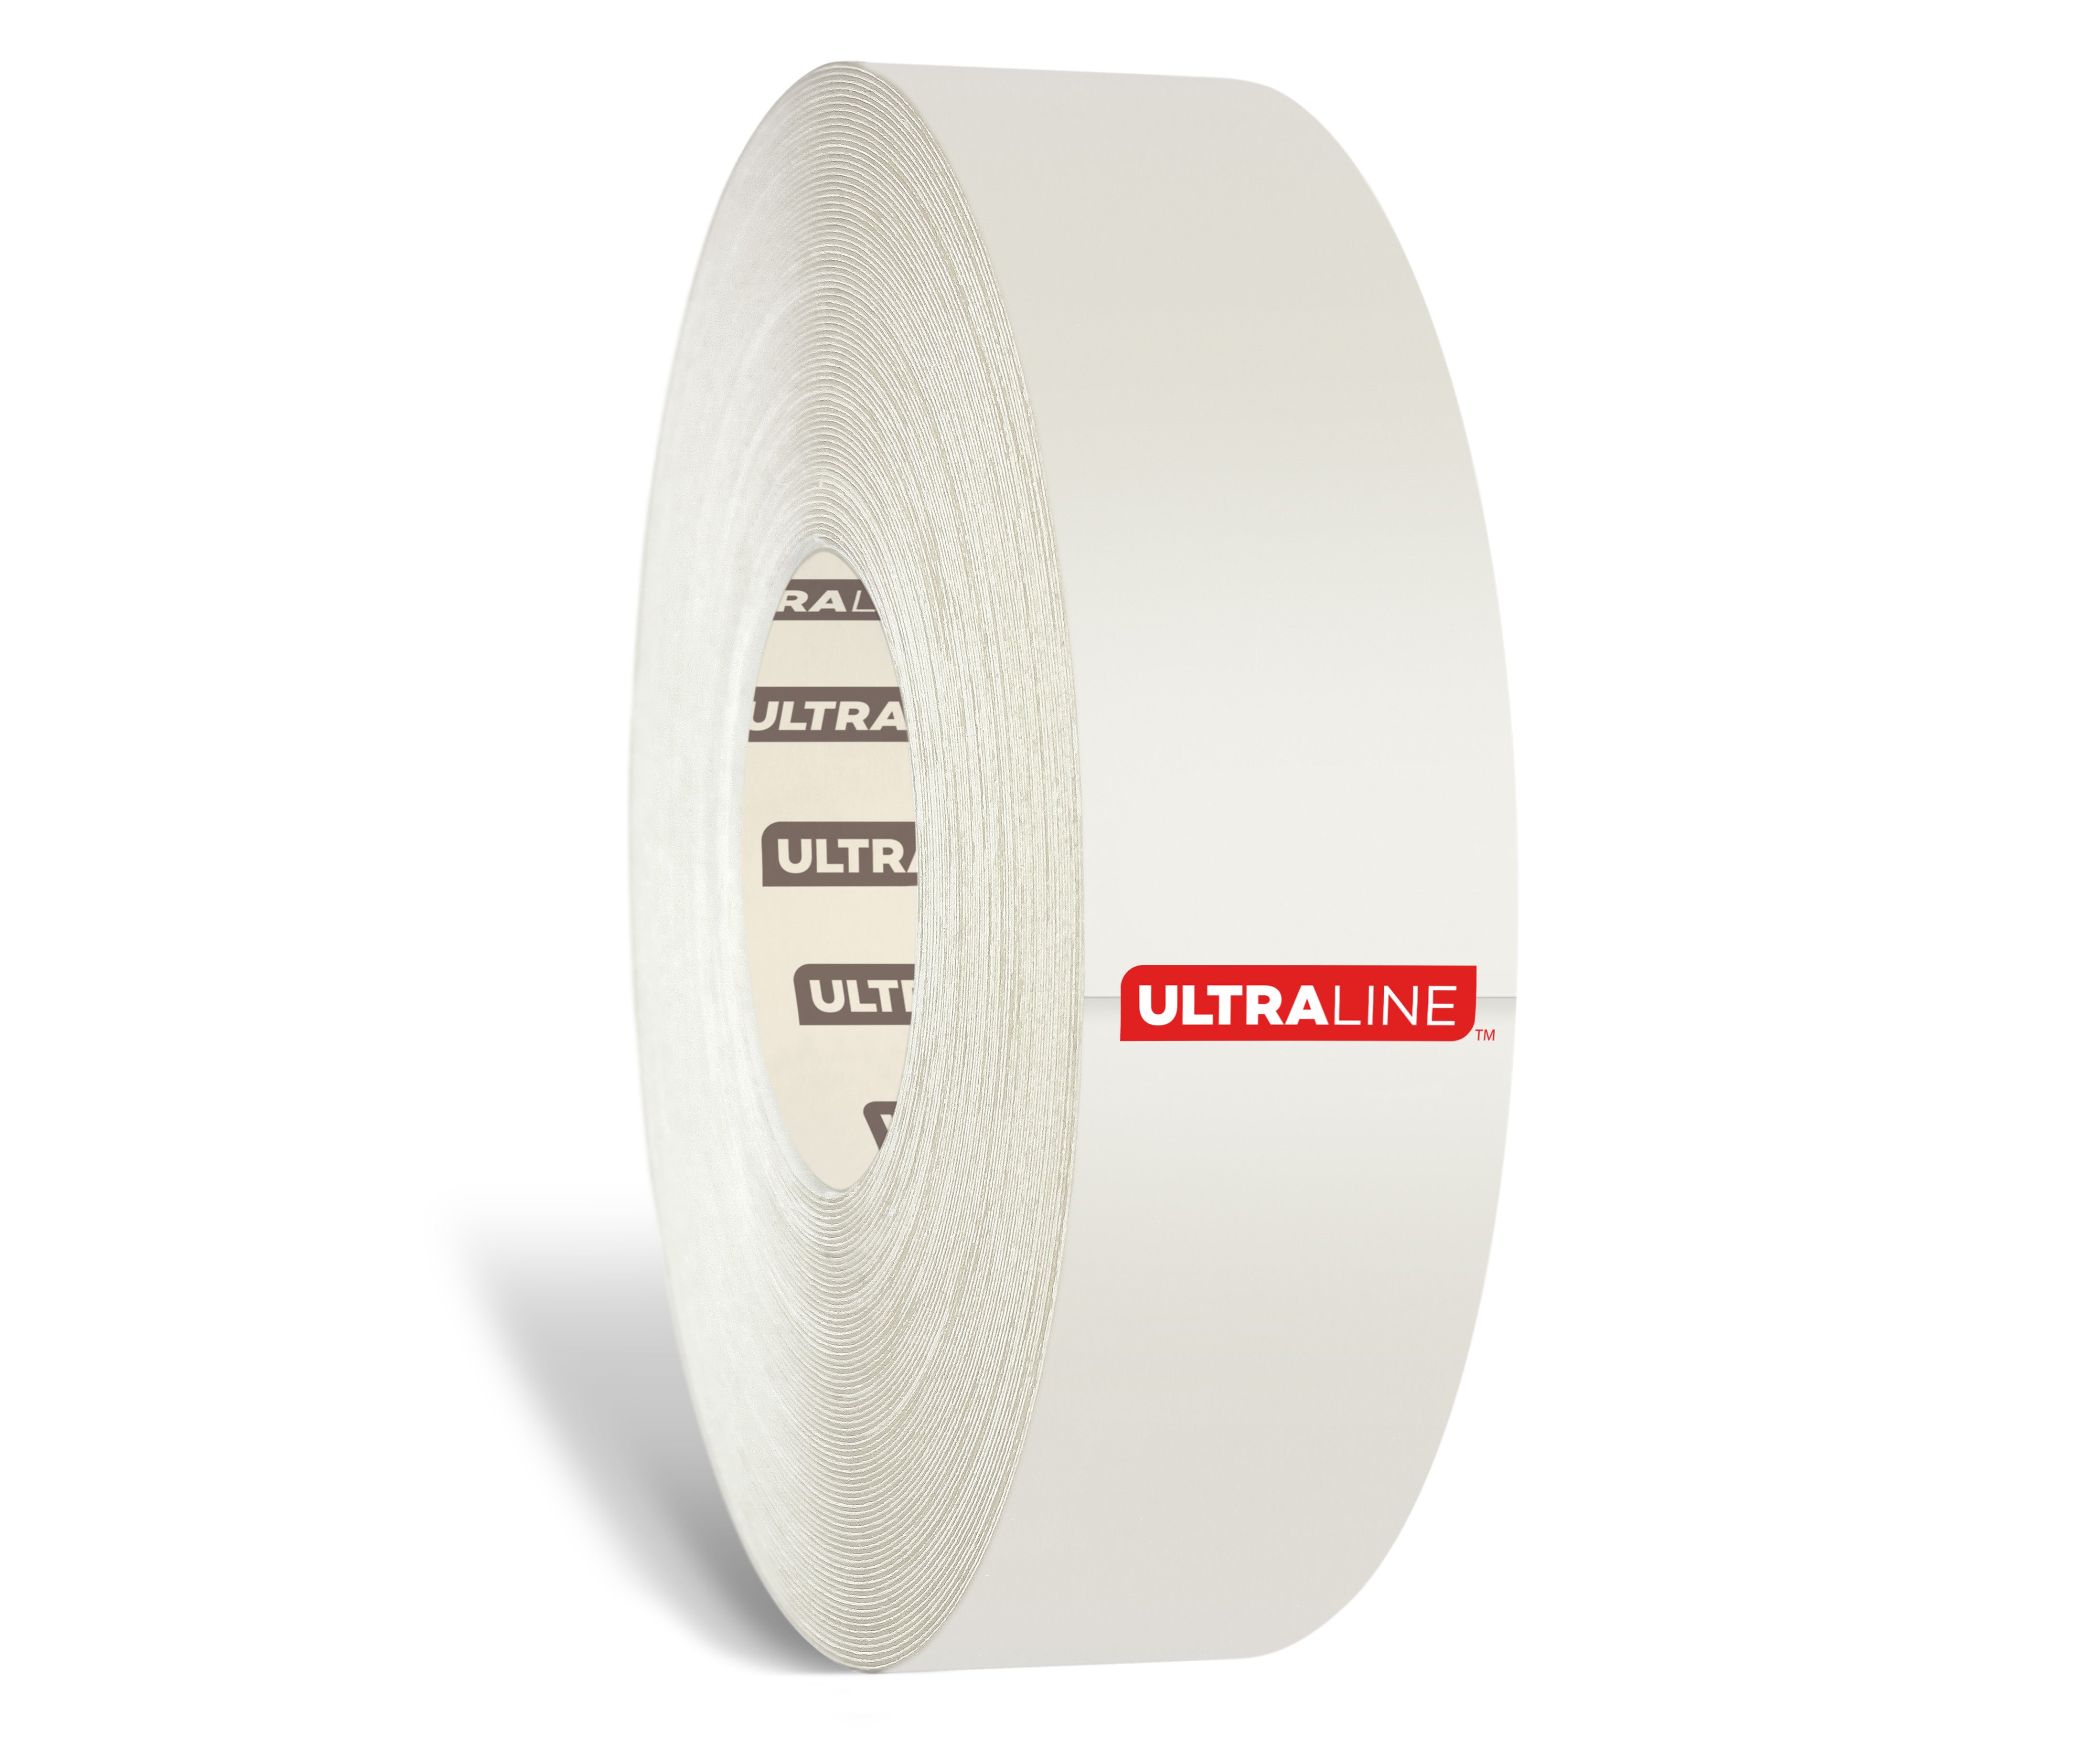 DC-5227X - Removable Exhibition Carpet Tape (25 or 36 yd) - Cloth - Double  Sided Tape